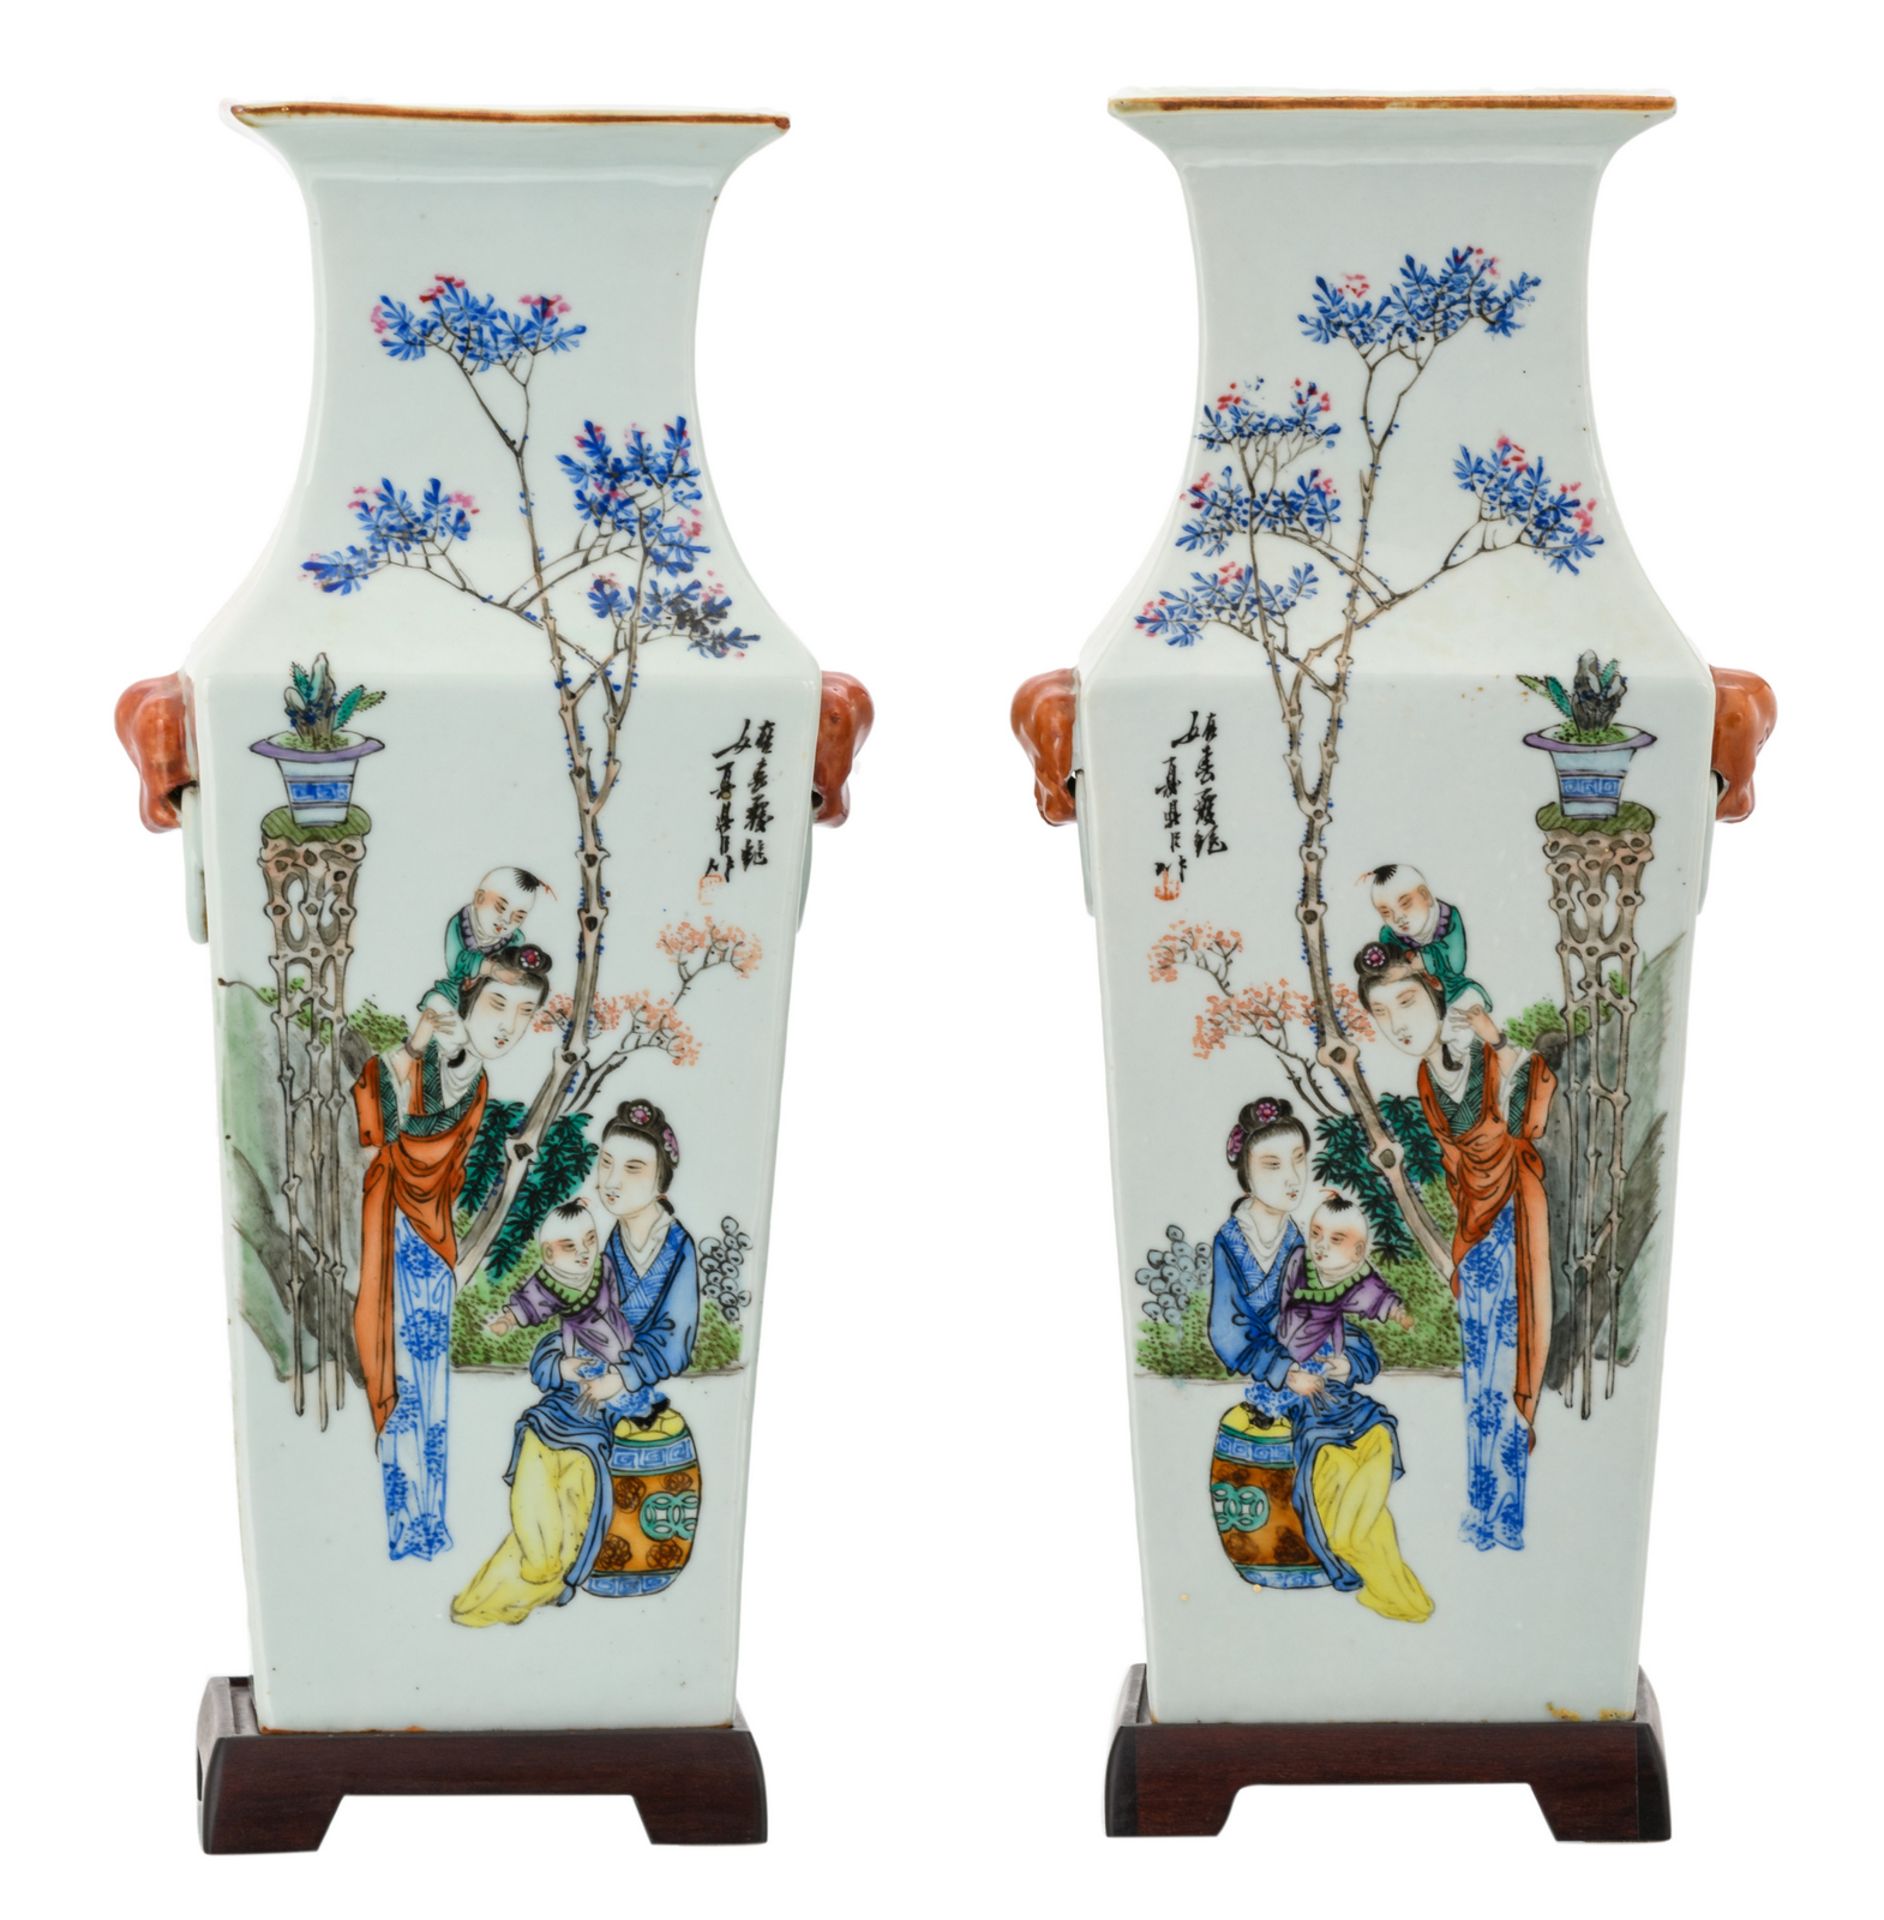 A pair of Chinese quadrangular polychrome decorated vases with animated scenes and calligraphic